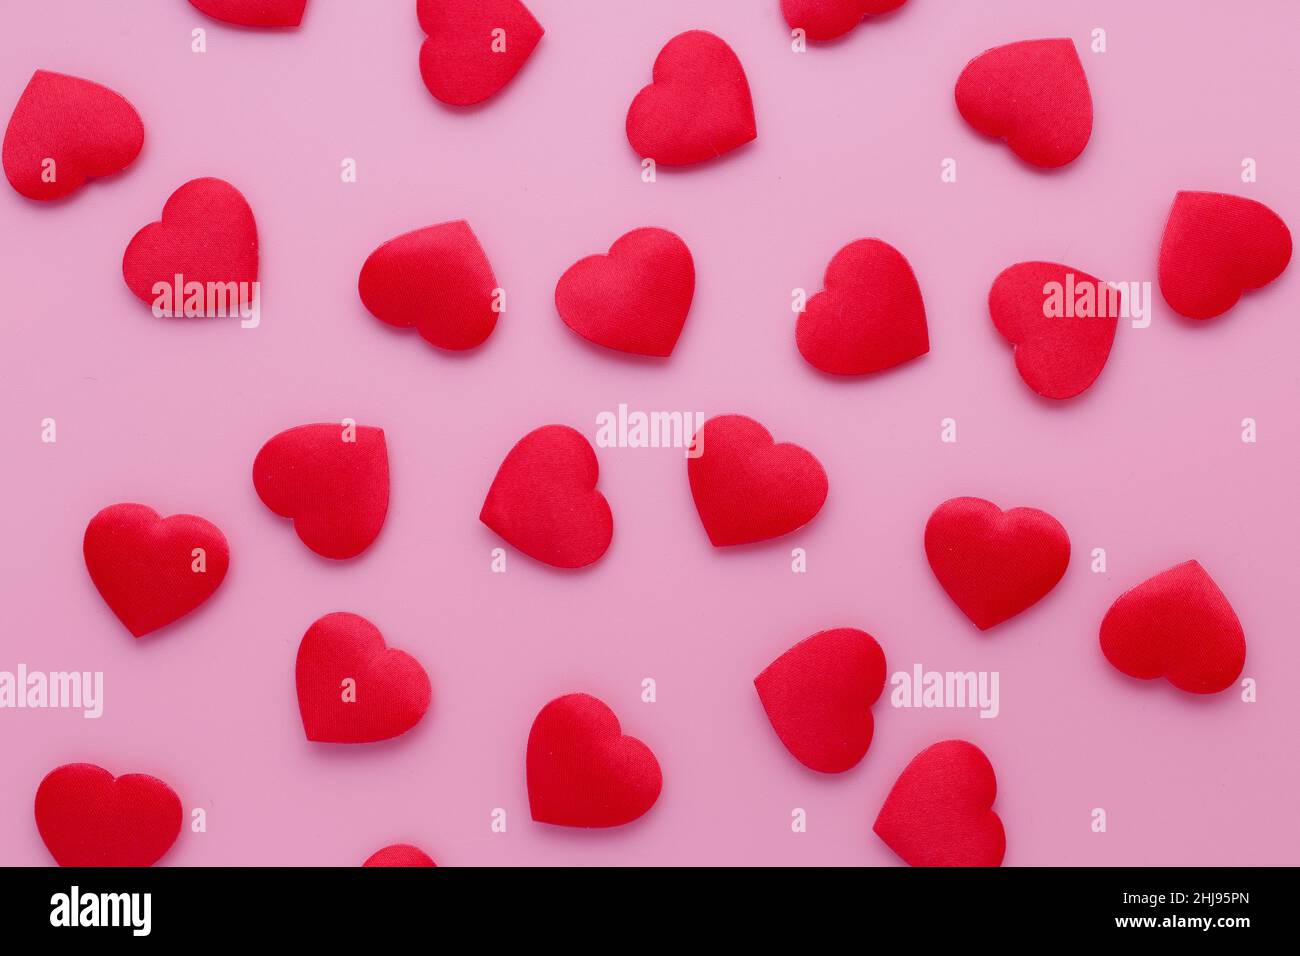 Lots of small, red fabric hearts, placed on a soft pink background in honor of the holiday of love and lovers. Romantic wallpaper. Stock Photo